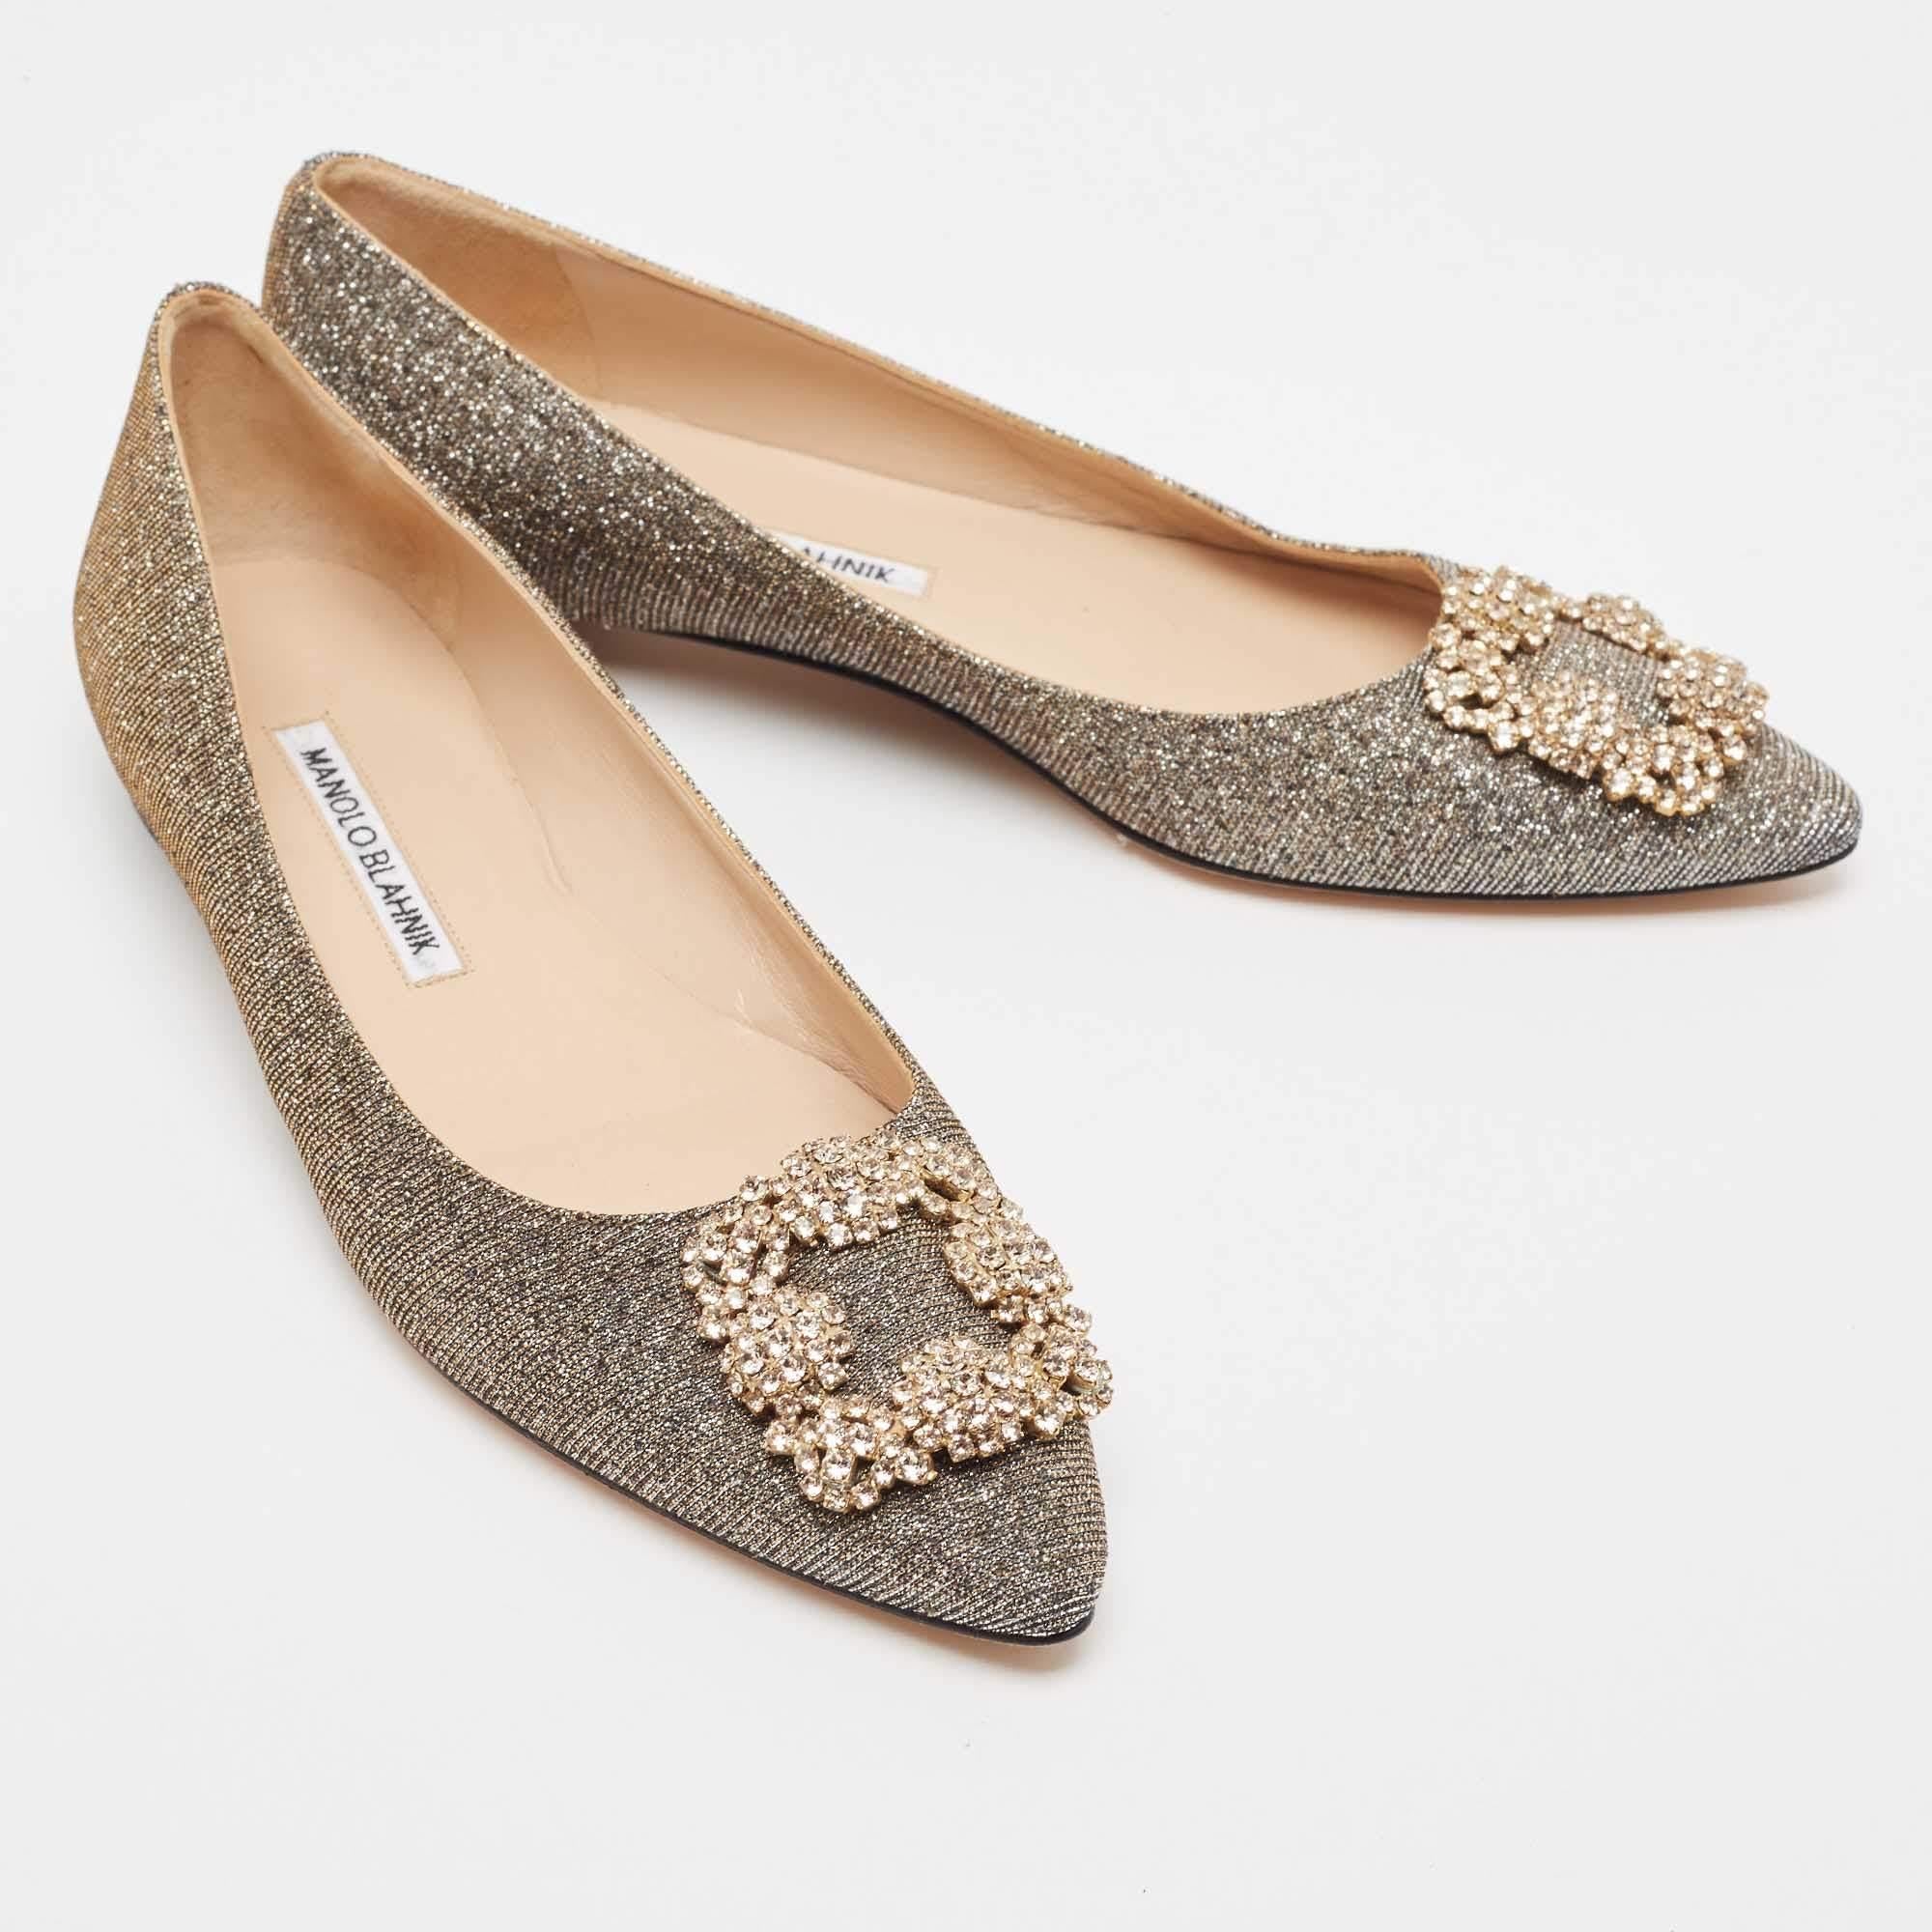 Created by Manolo Blahnik, these ballet flats are a staple style every shoe collection needs. Constructed using lurex fabric, the shoes are highlighted by an embellished buckle.

